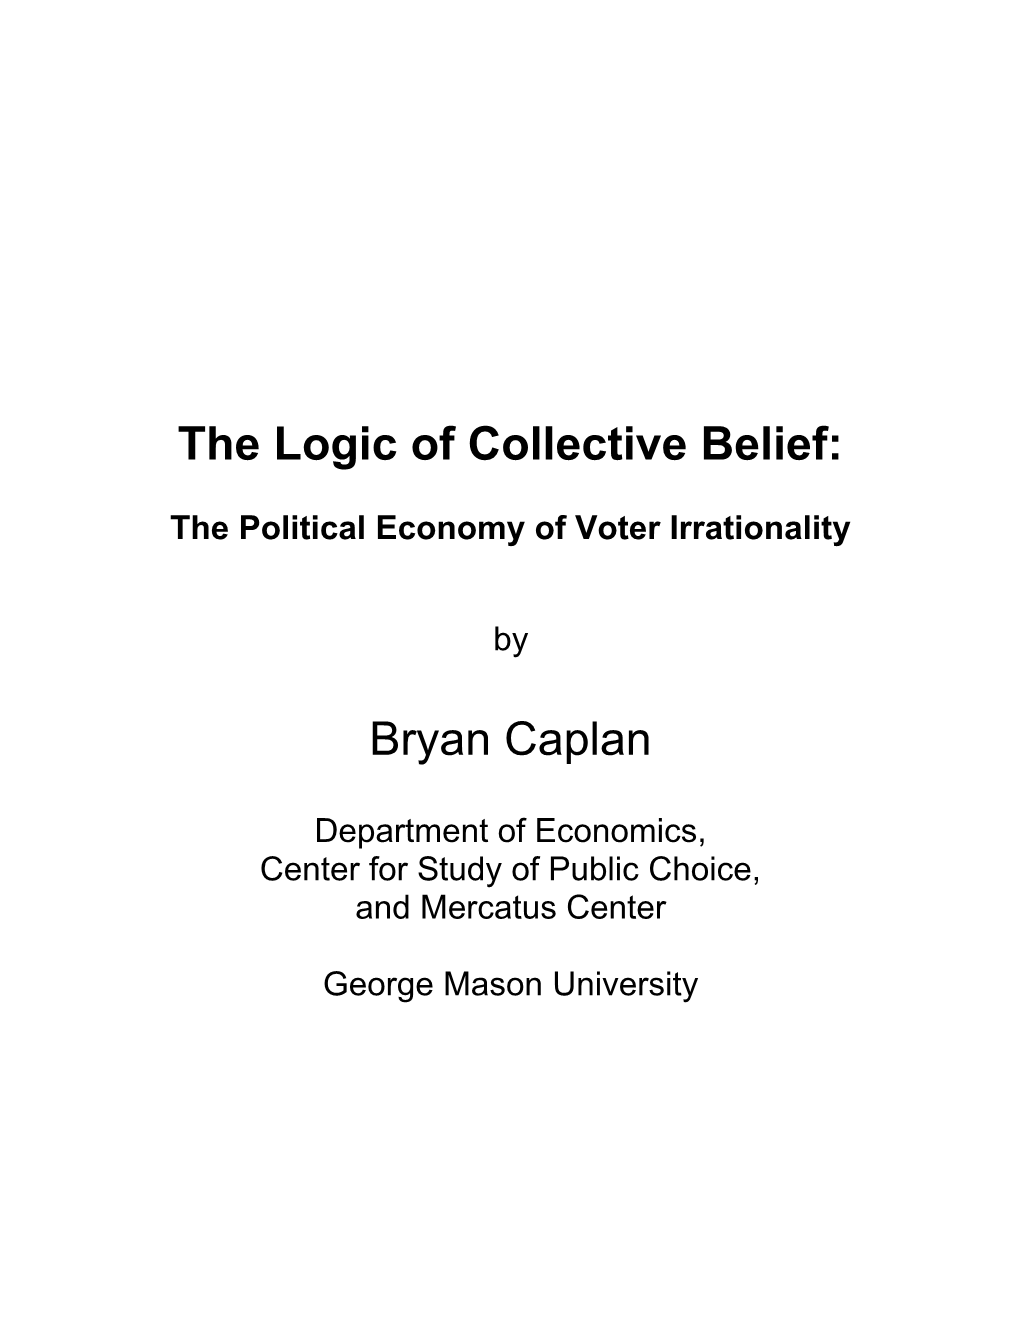 The Logic of Collective Belief